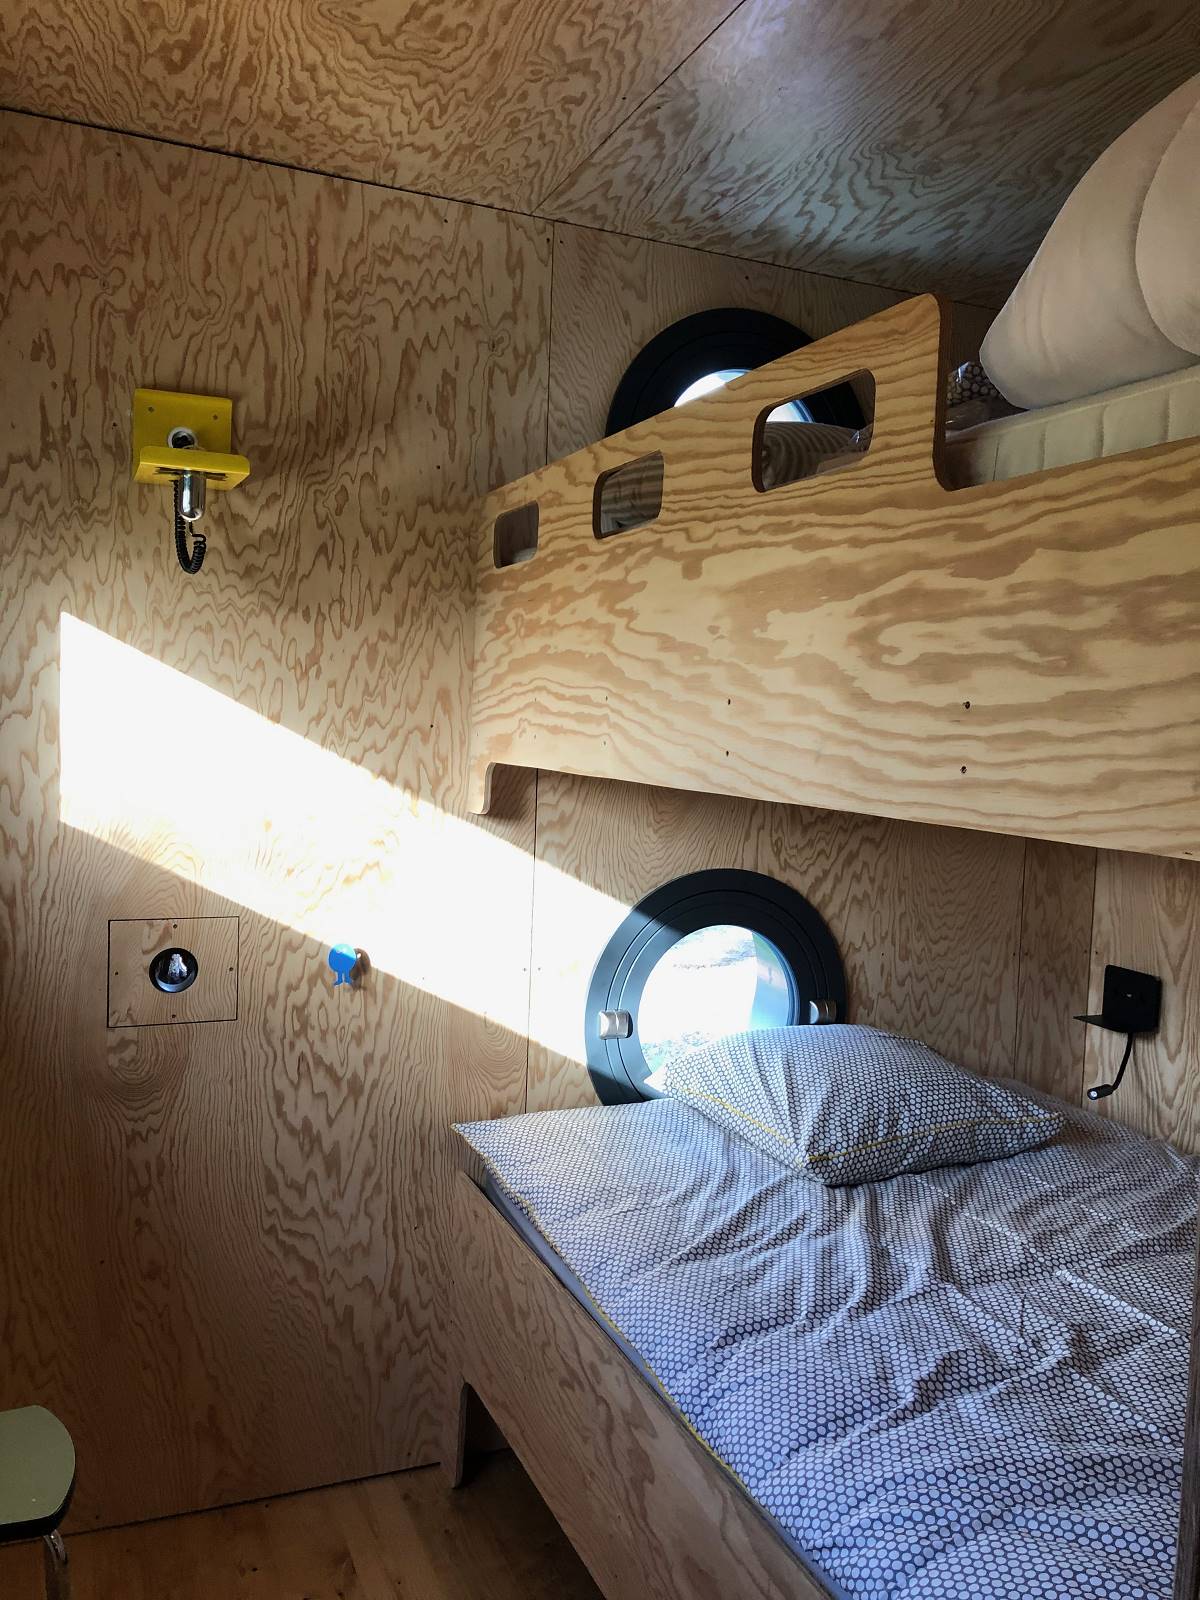 The star cabin room